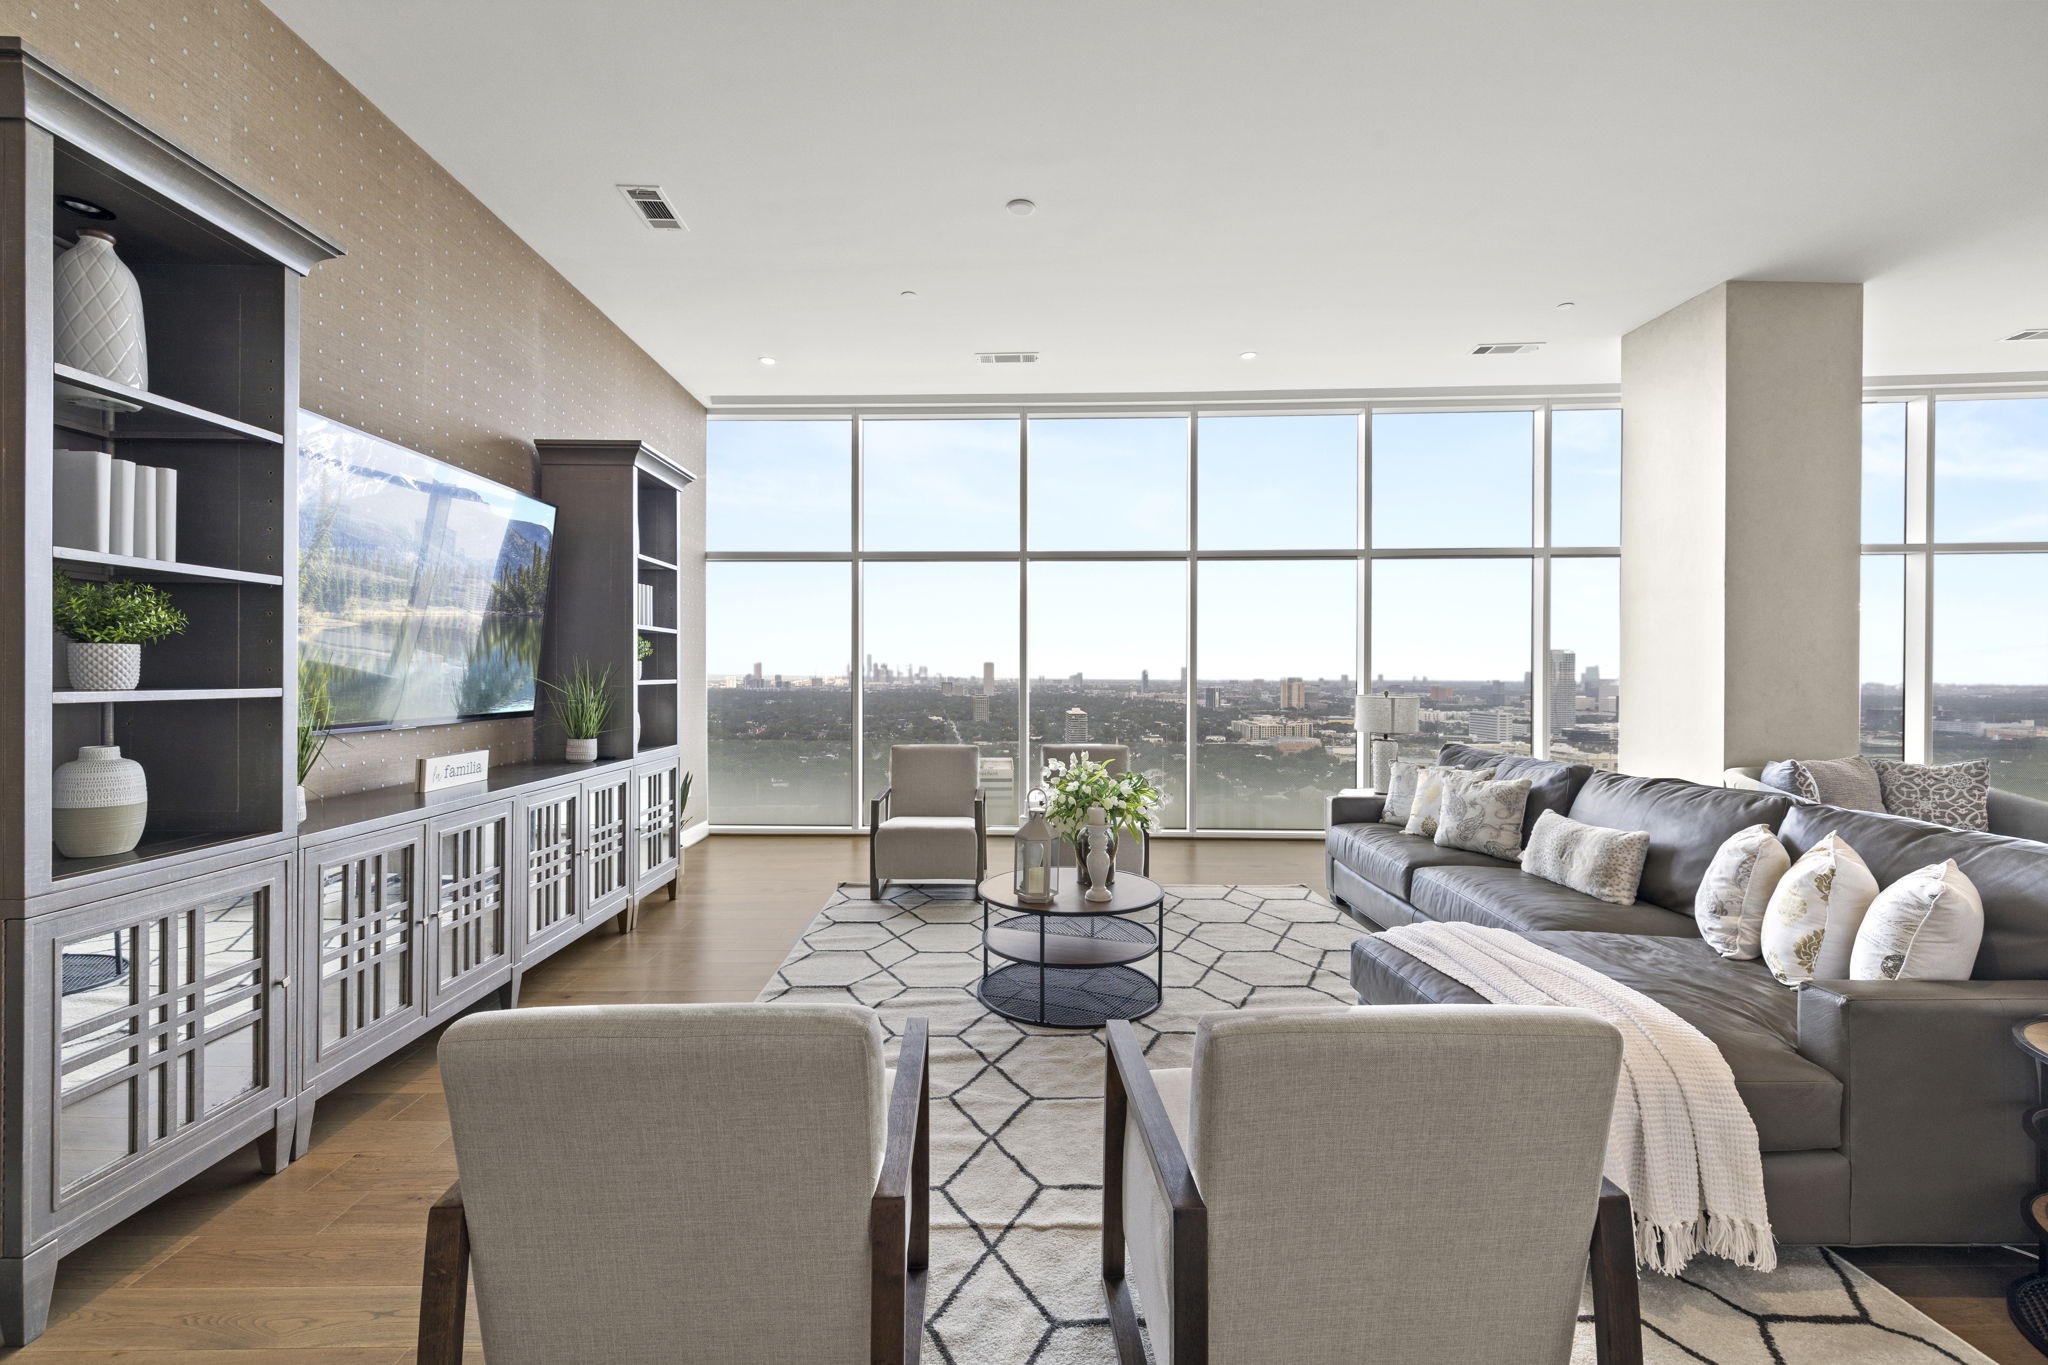 Step into this living room and immerse yourself in the captivating city views.